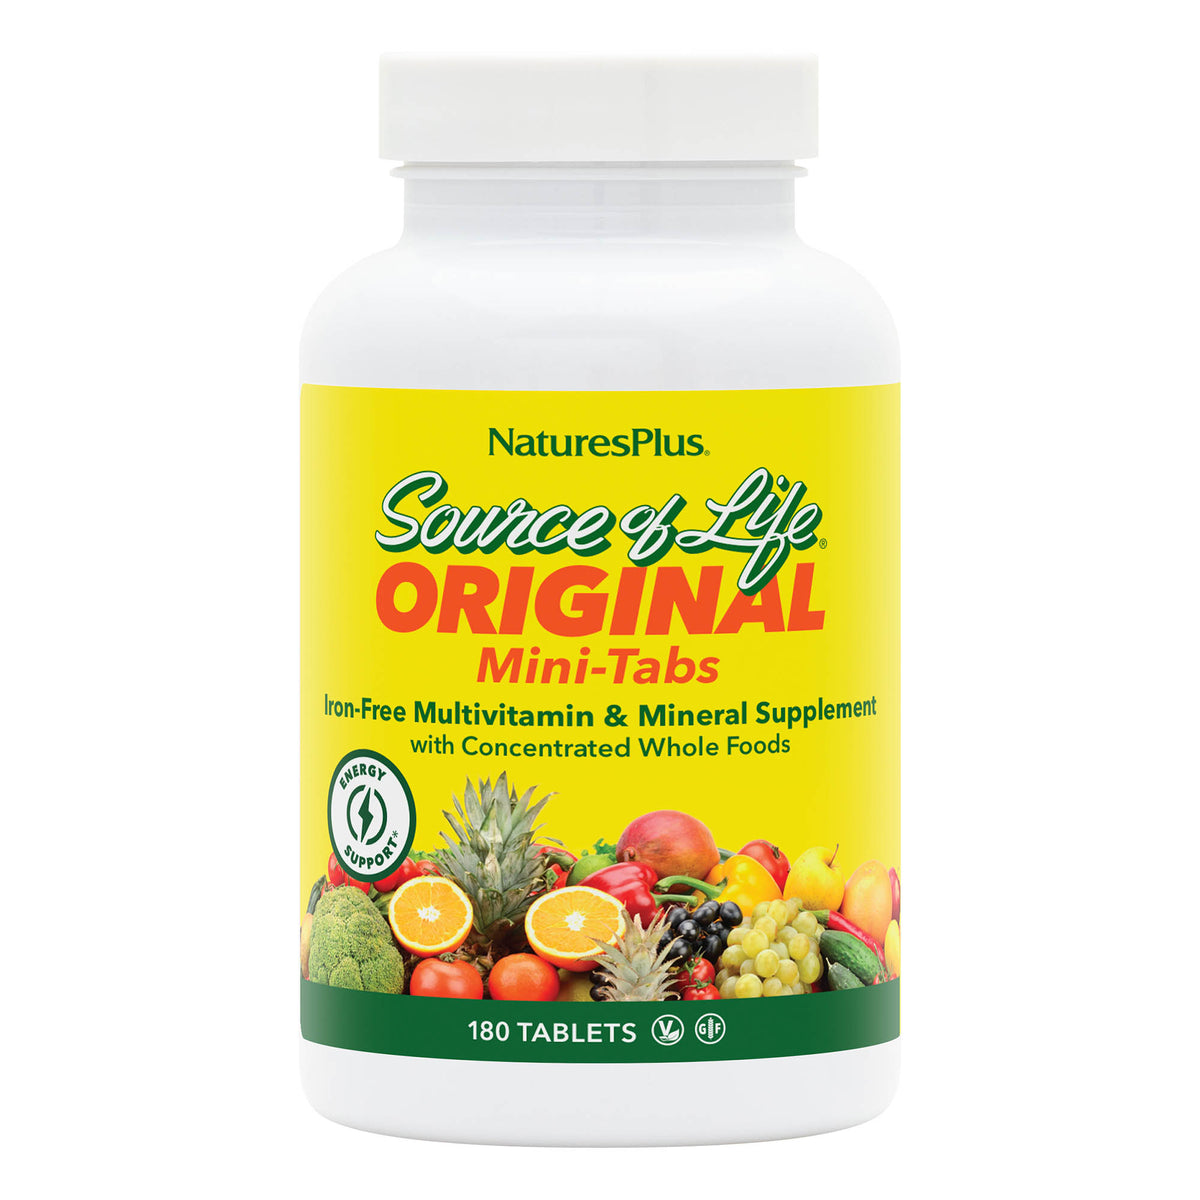 product image of Source of Life® Multivitamin No-Iron Mini-Tabs containing 180 Count